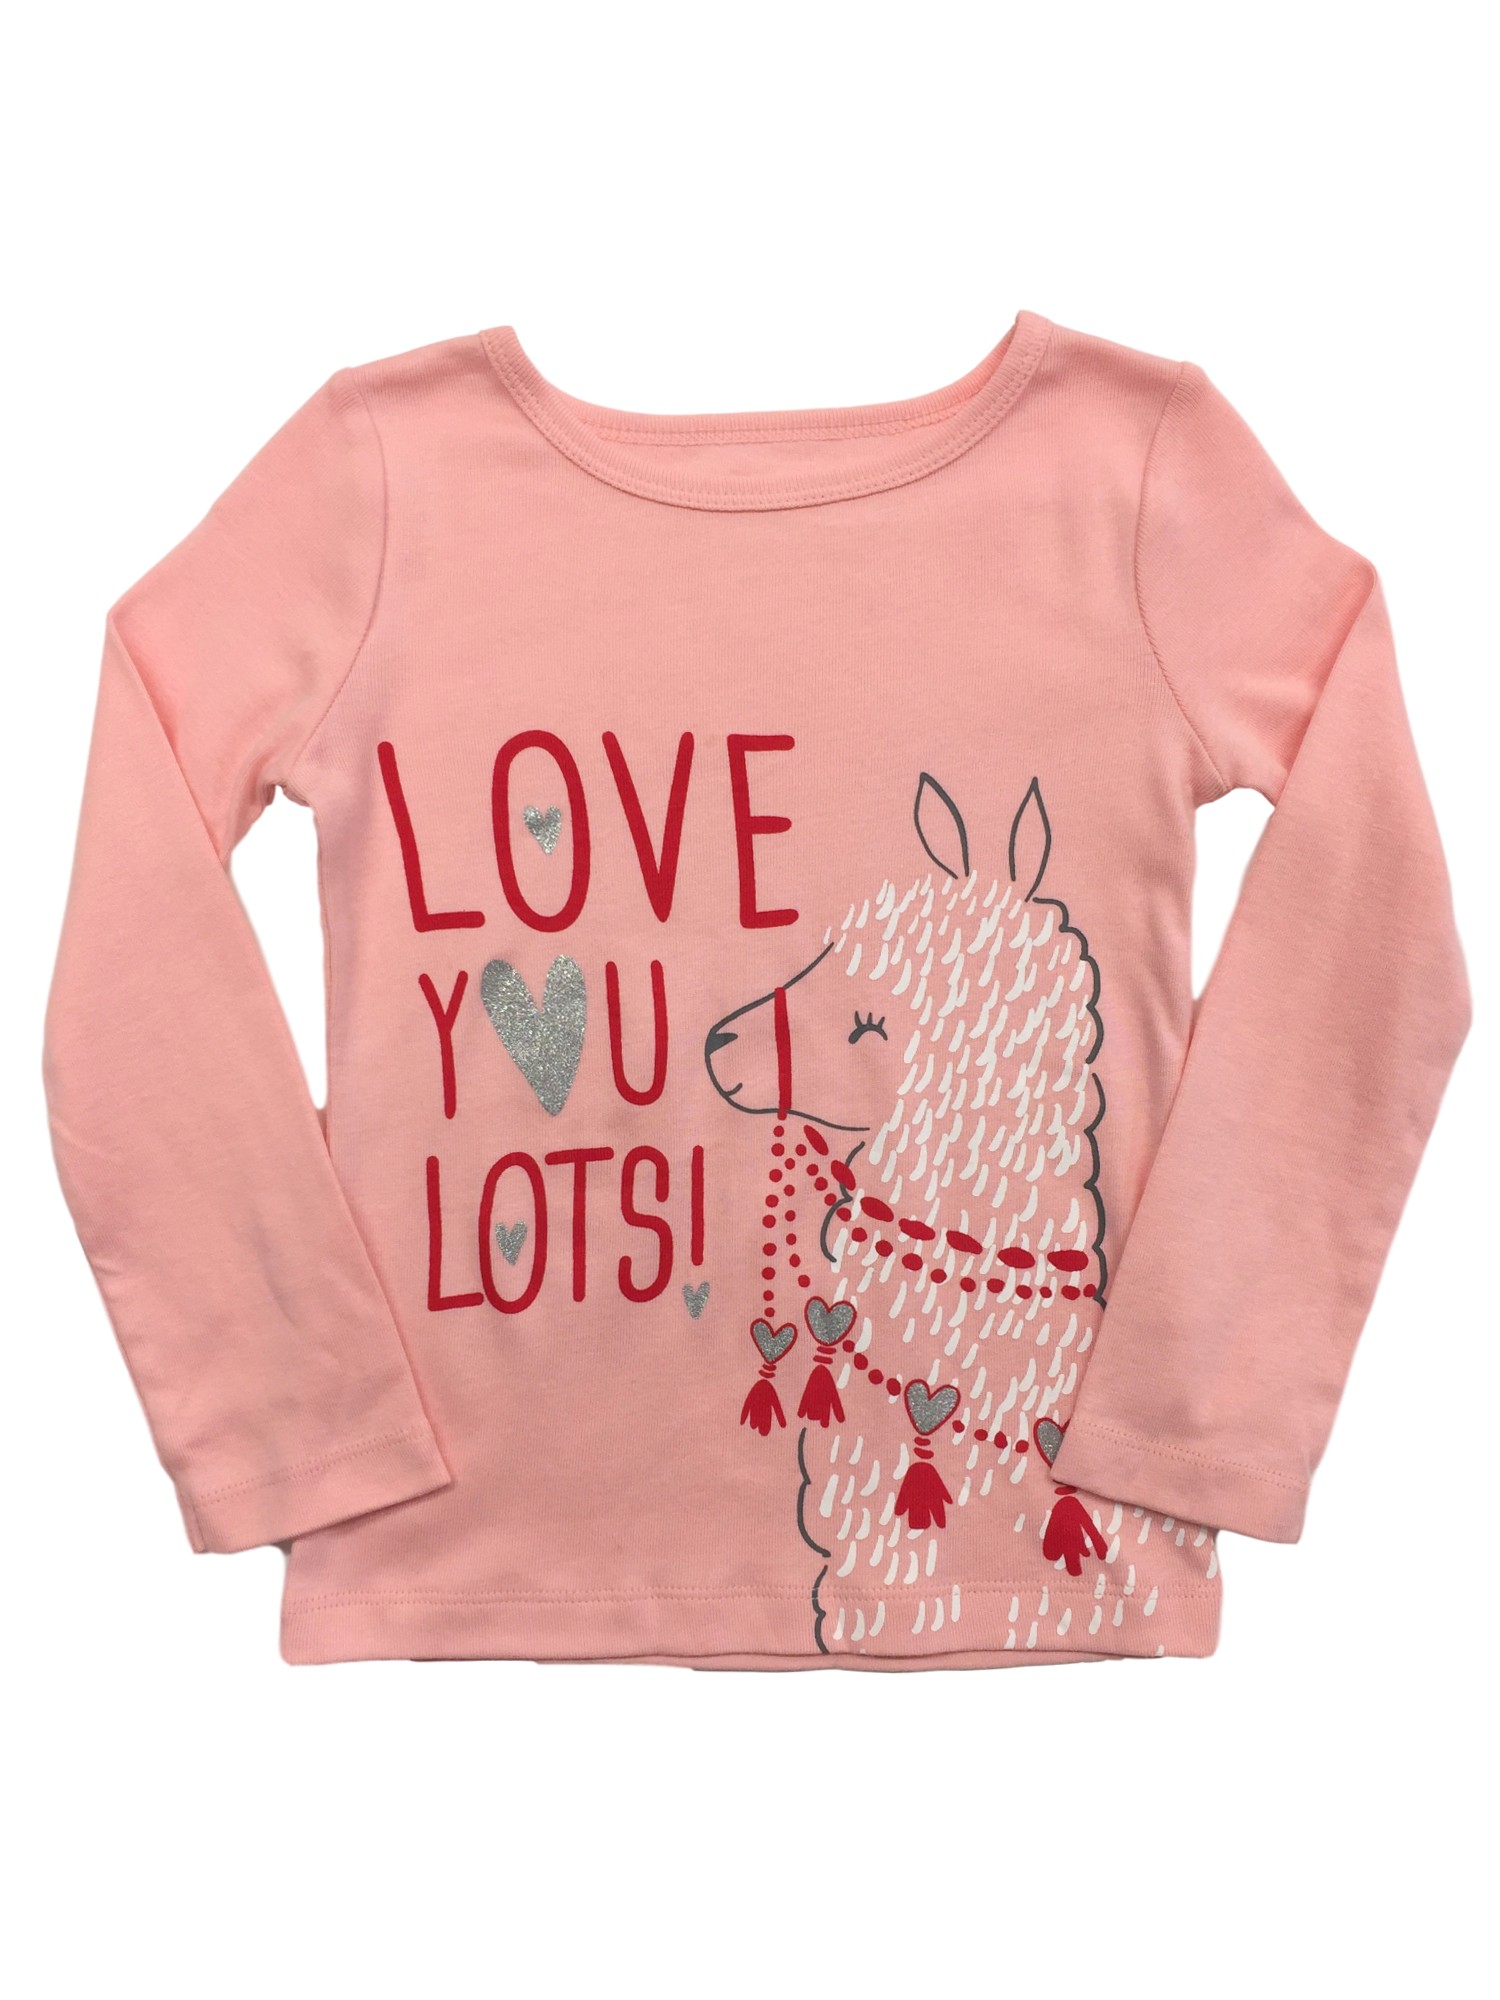 Carter's Carters Infant Toddler Girls Pink Love You Lots Llama Valentine's Day Shirt